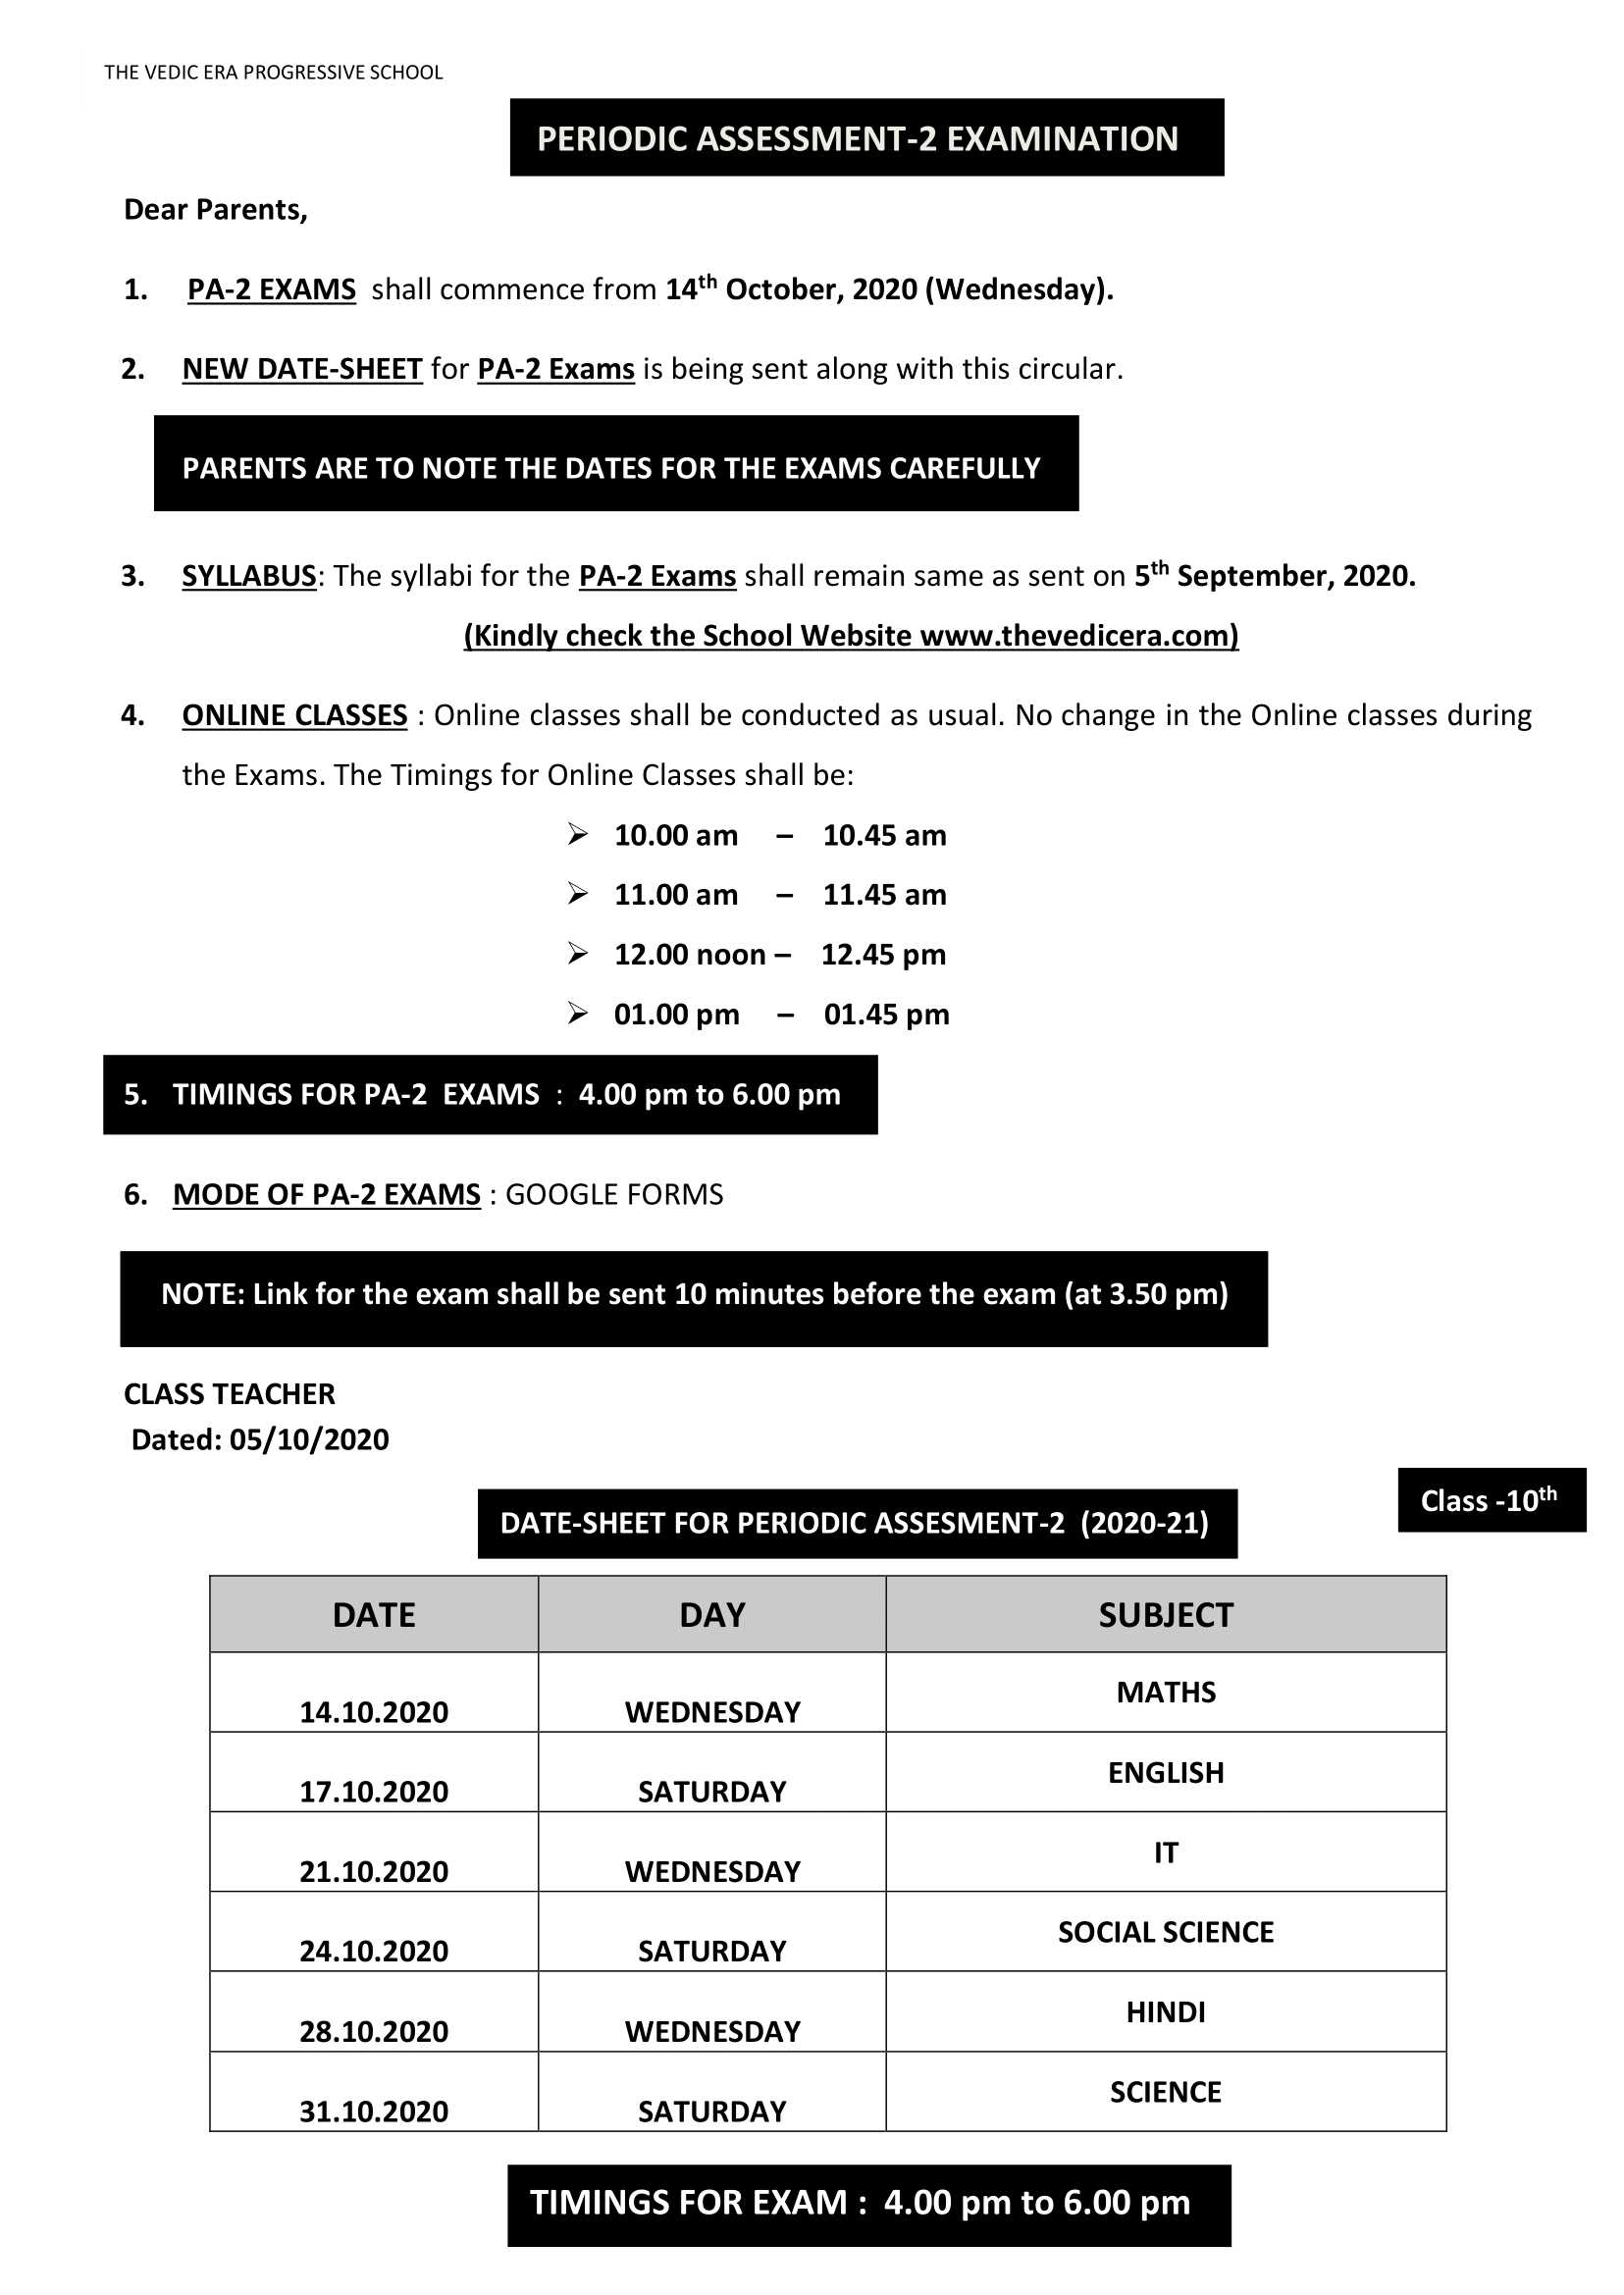 DATE-SHEET FOR PA-2 EXAMS